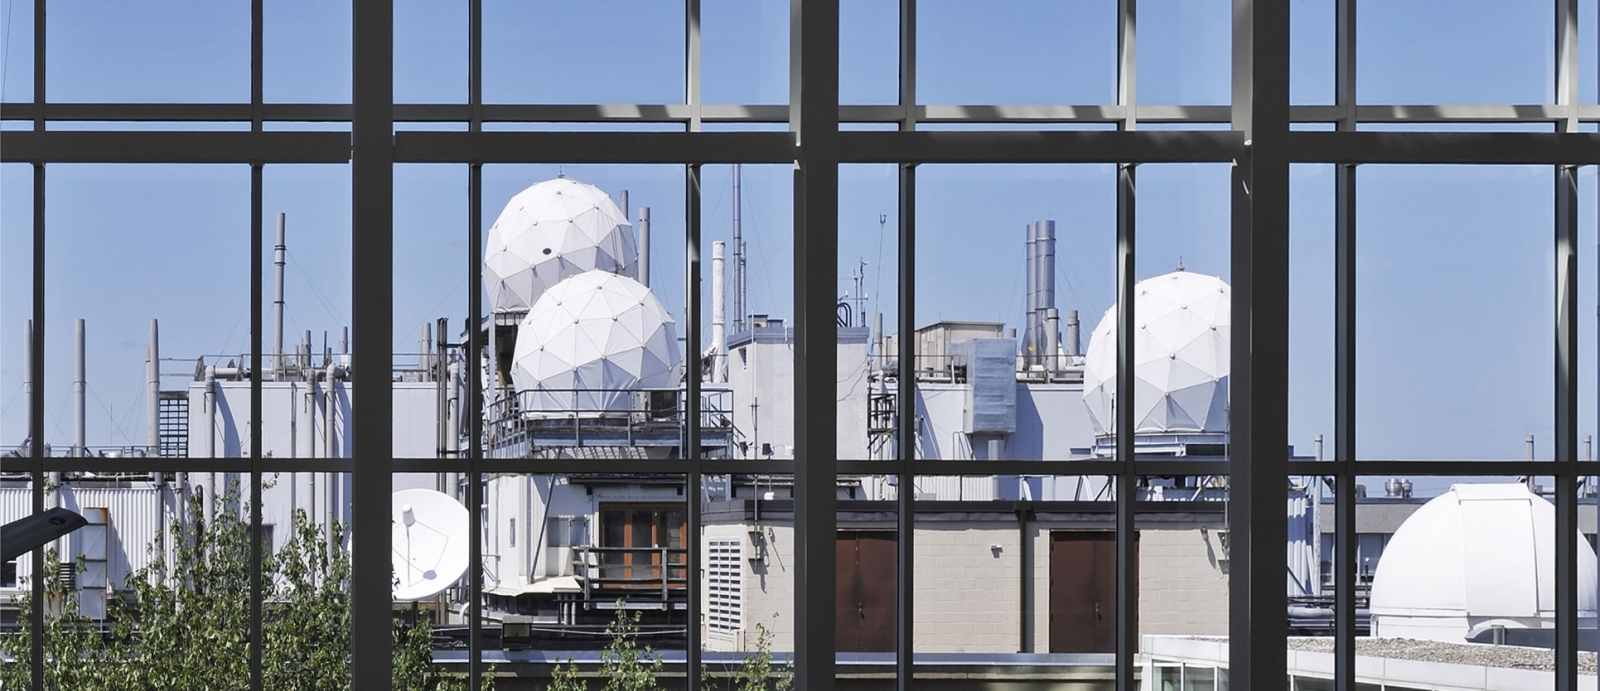 R&D into radar systems at Lincoln Laboratory takes advantage of several radars installed on a Laboratory rooftop.